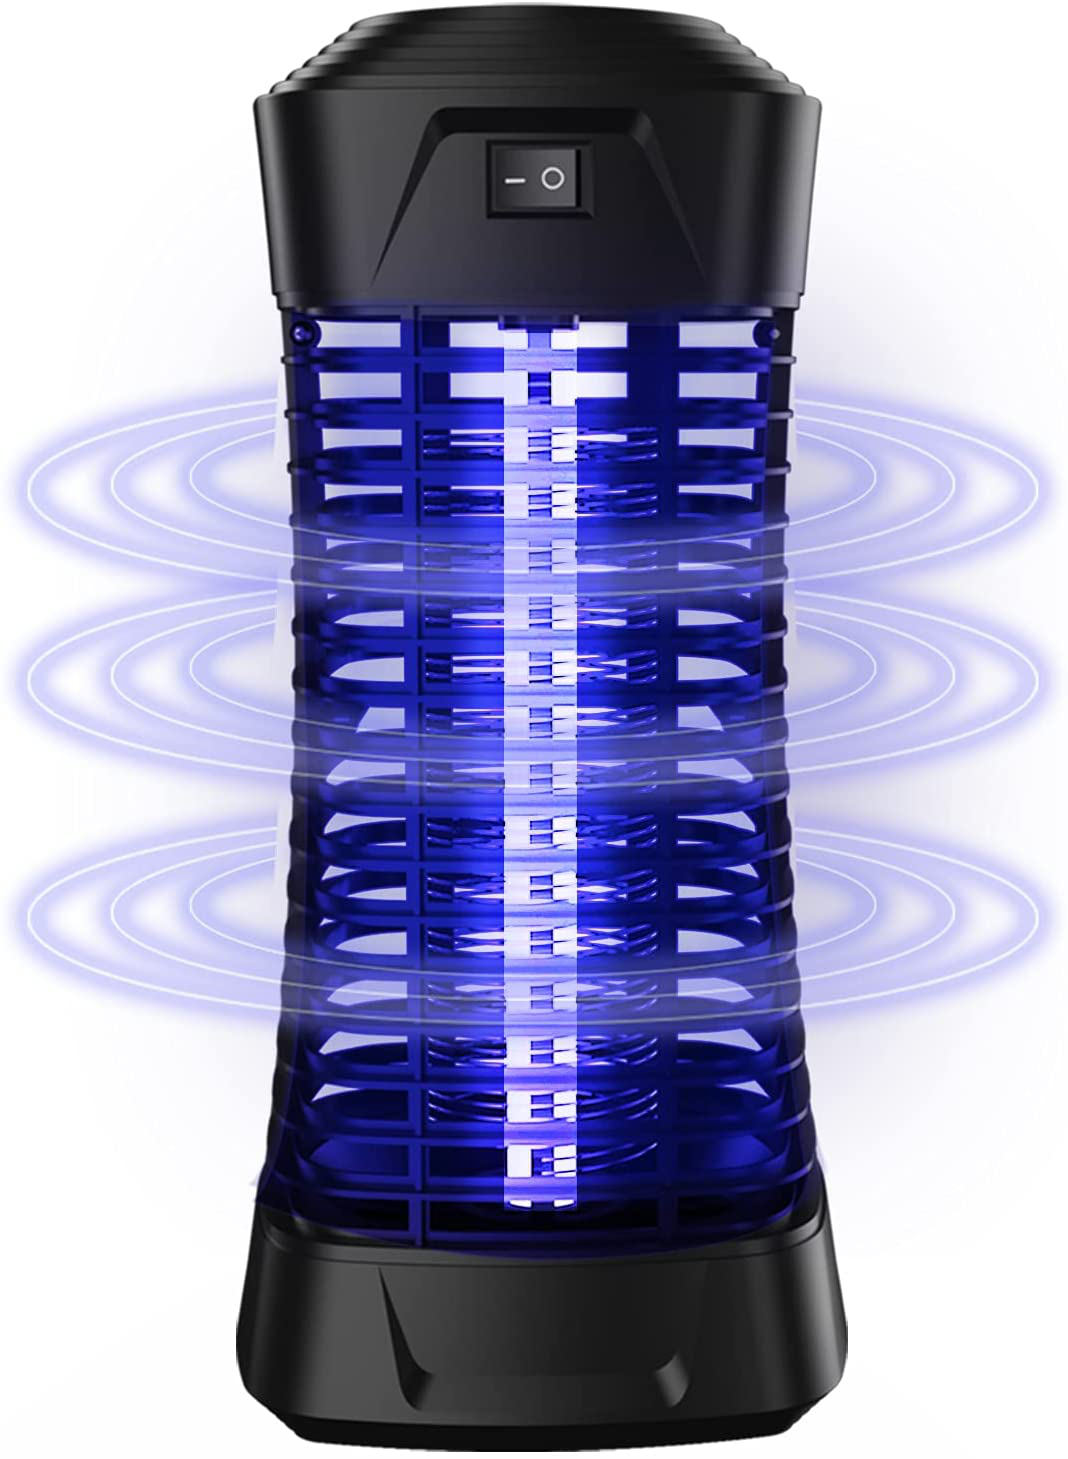 Bug Zapper Electric Insect Killer for Indoor, Electrionic Mosquito Fly Trap for Home Office Hotel